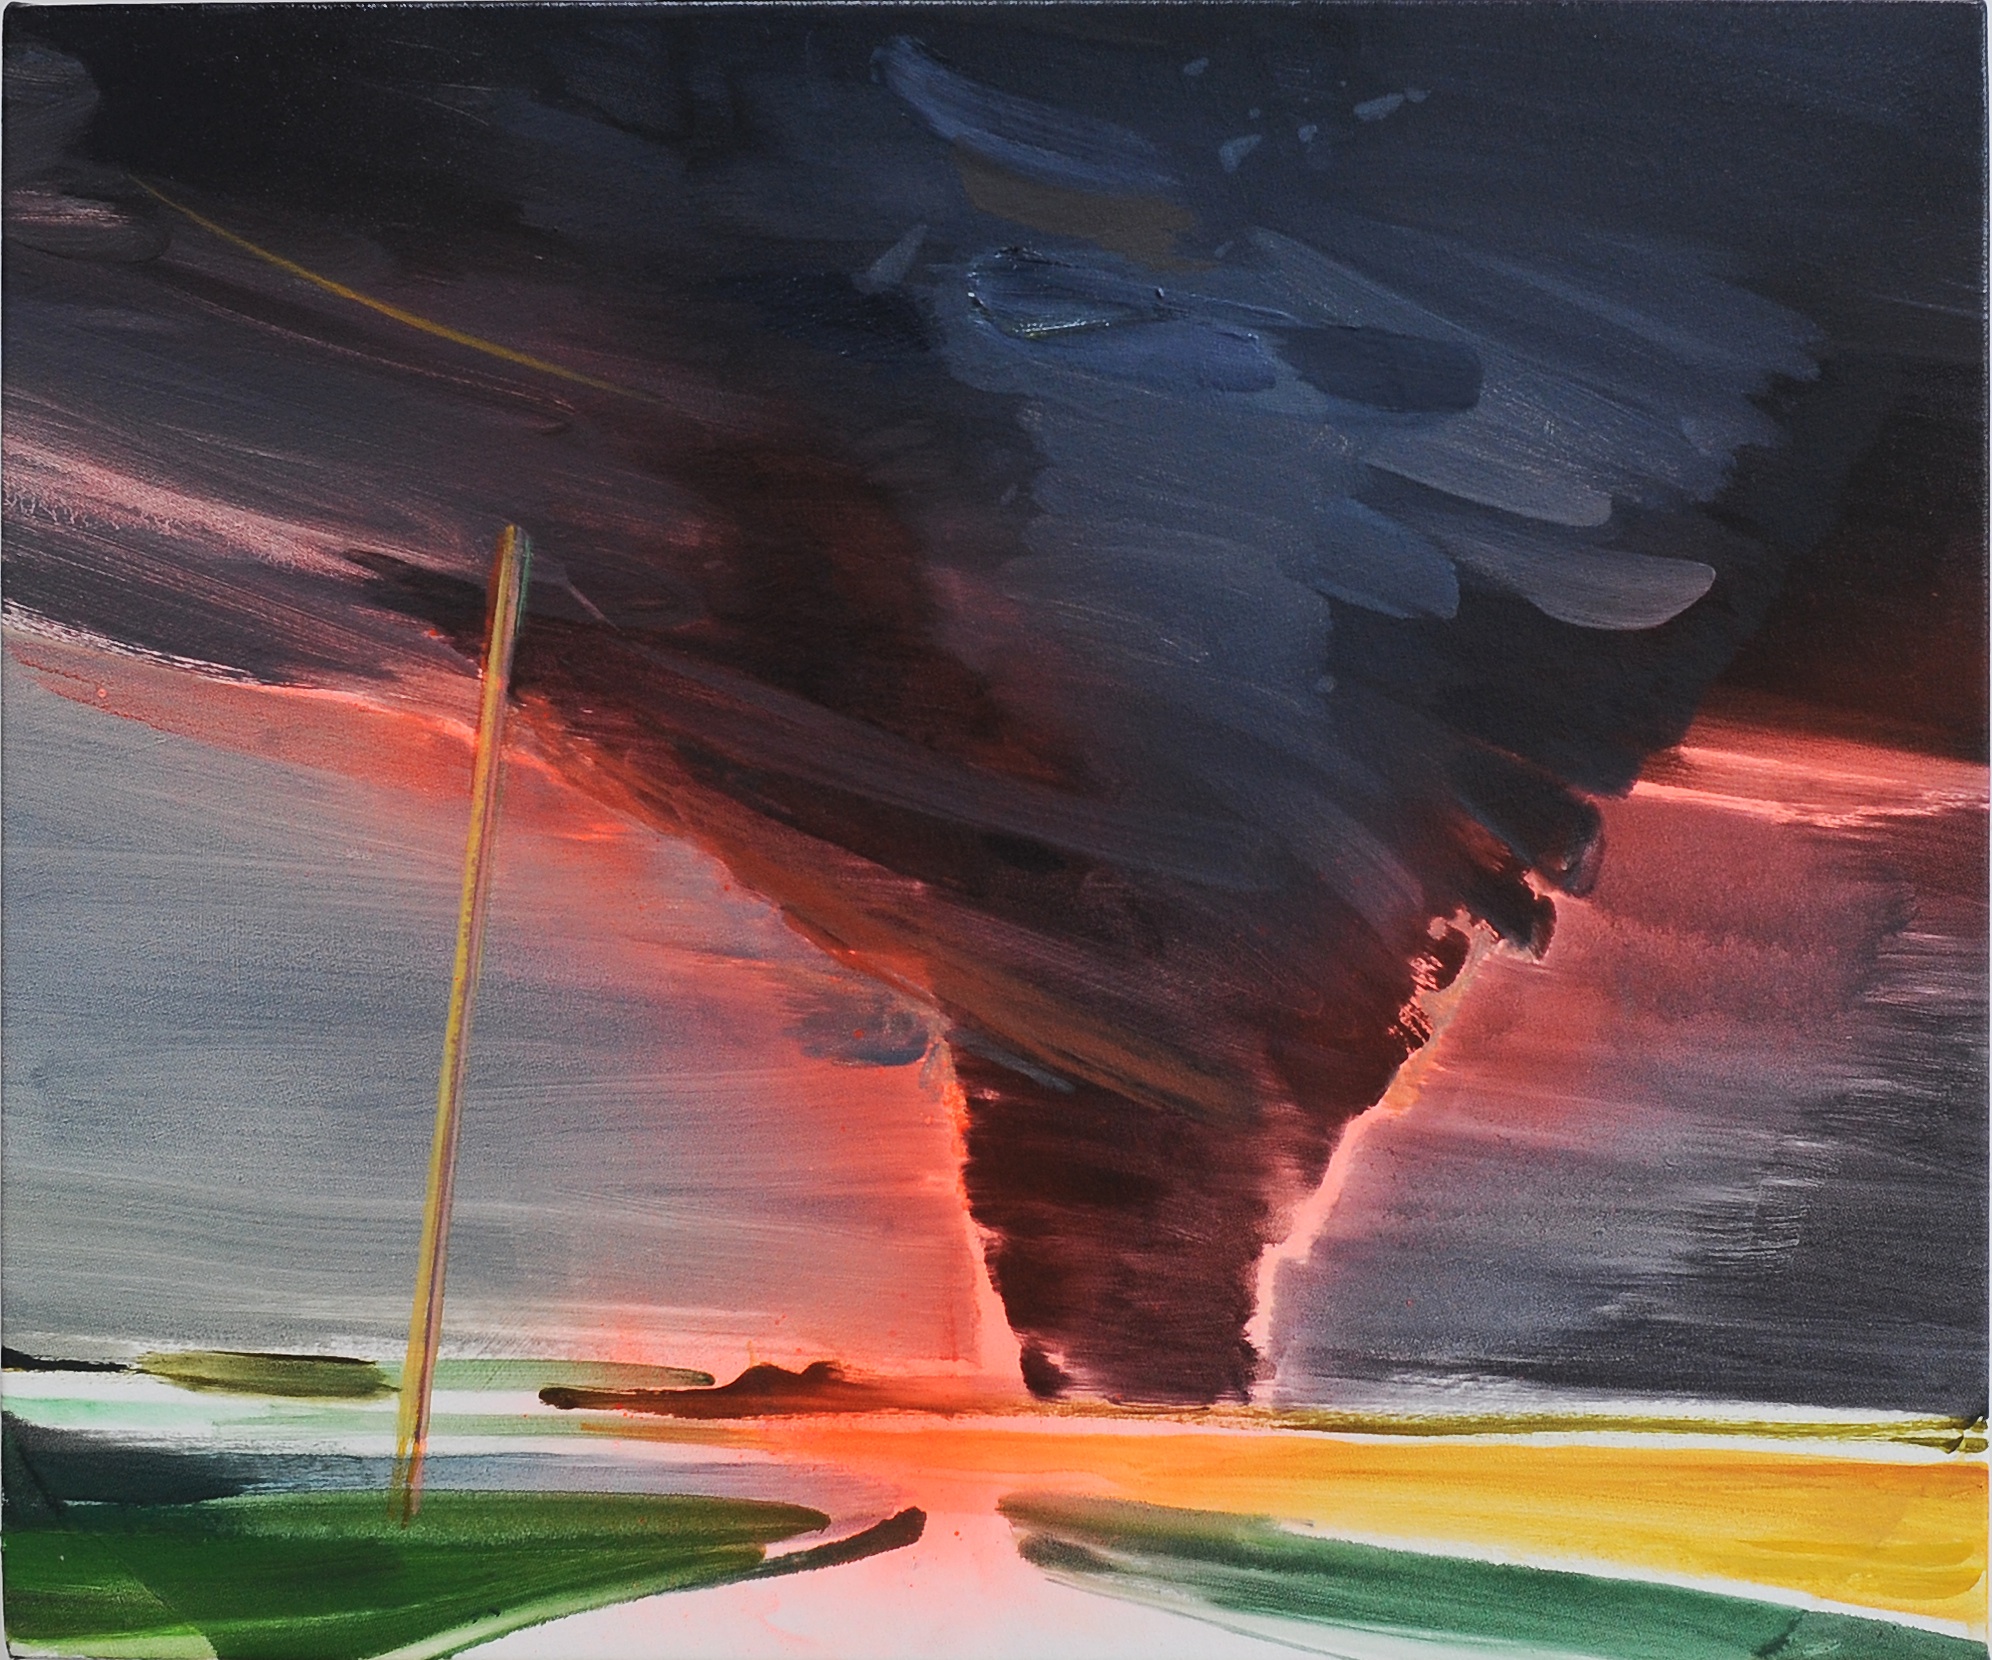   Storm Path , 2013, oil and spraypaint on canvas, 54 x 65cm. Nirox Foundation collection, South Africa 